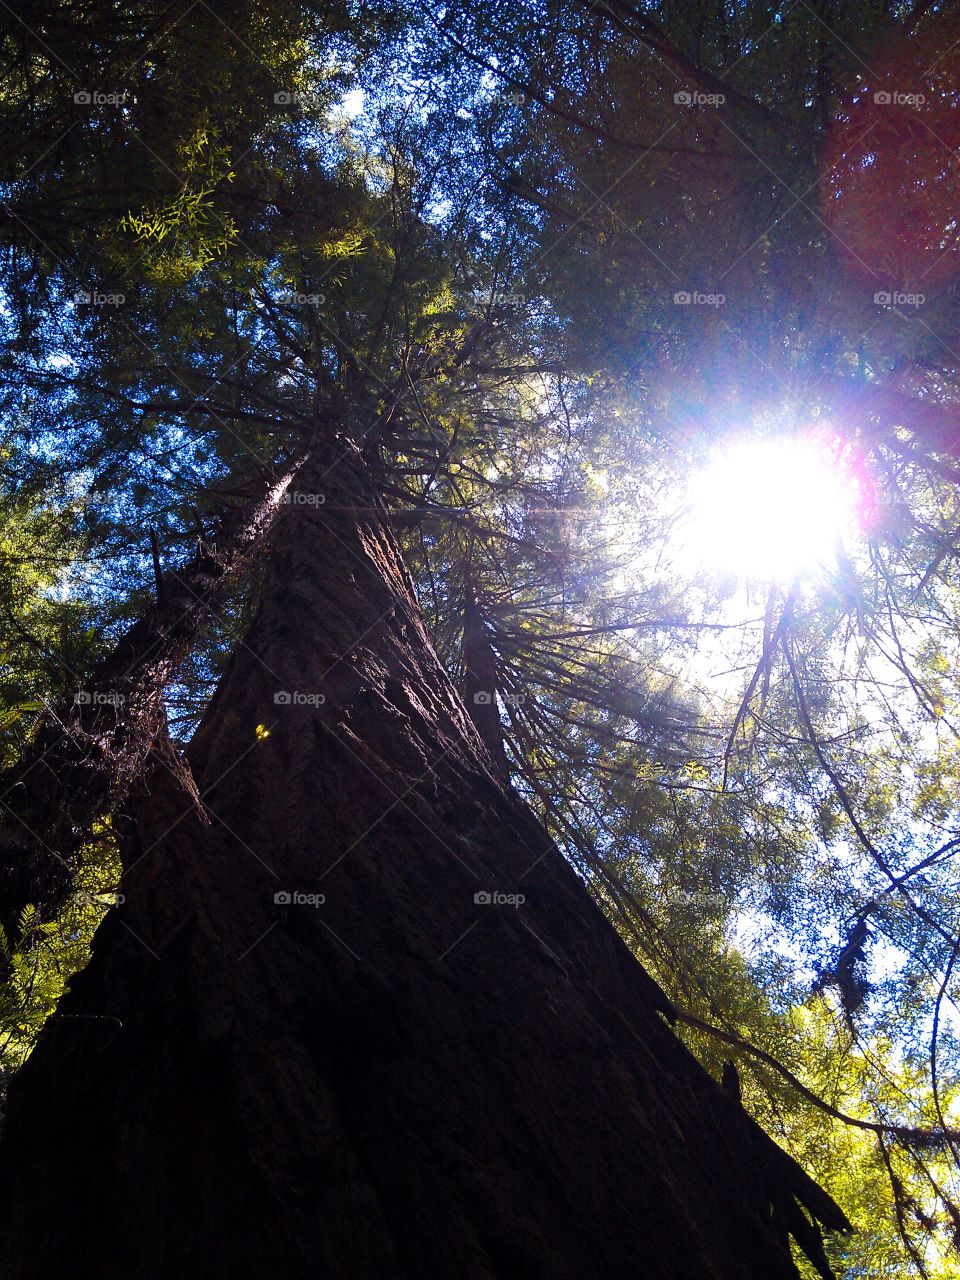 Endurance . The great redwood trees of California, majestic and enduring